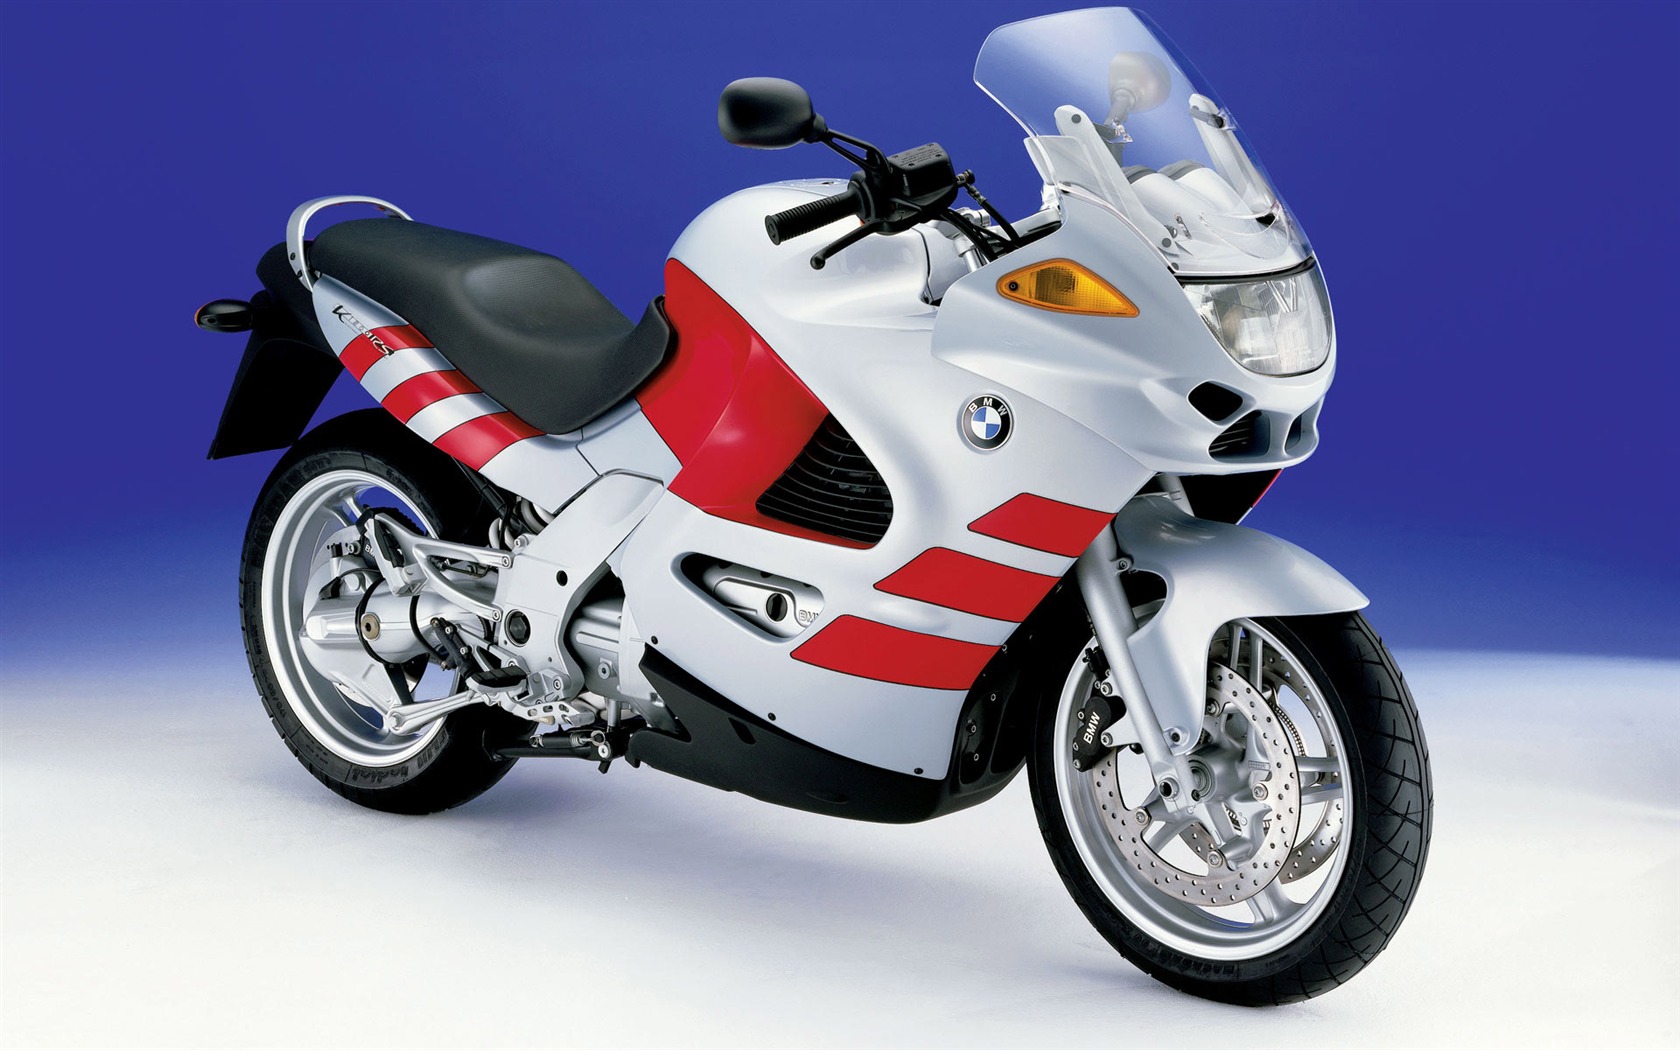 BMW motorcycle wallpapers (1) #1 - 1680x1050